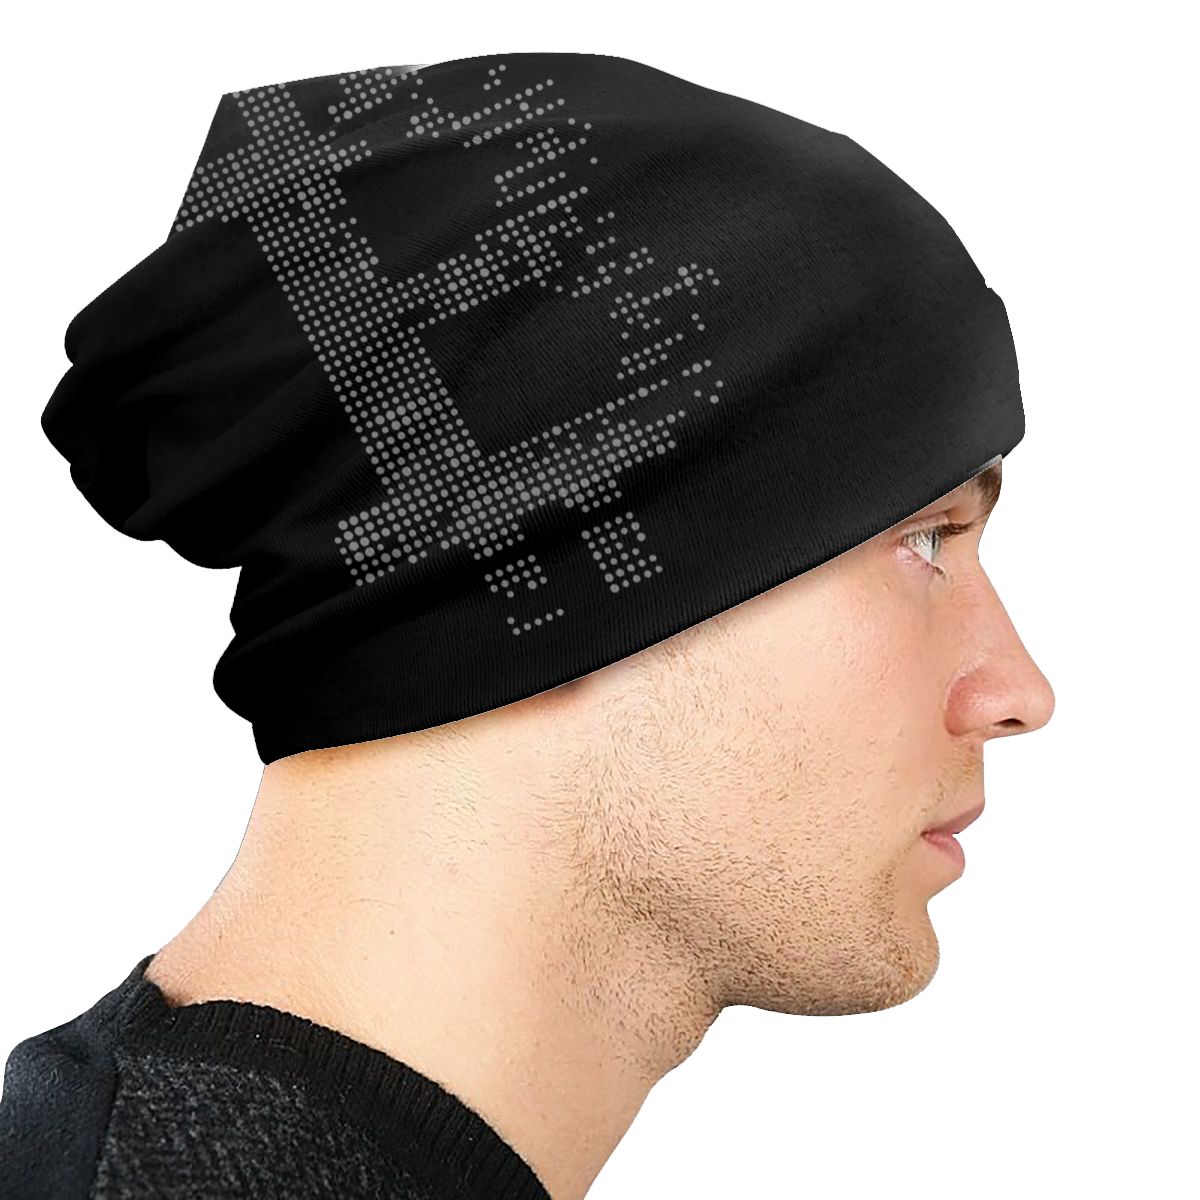 Bitcoin knitted hat